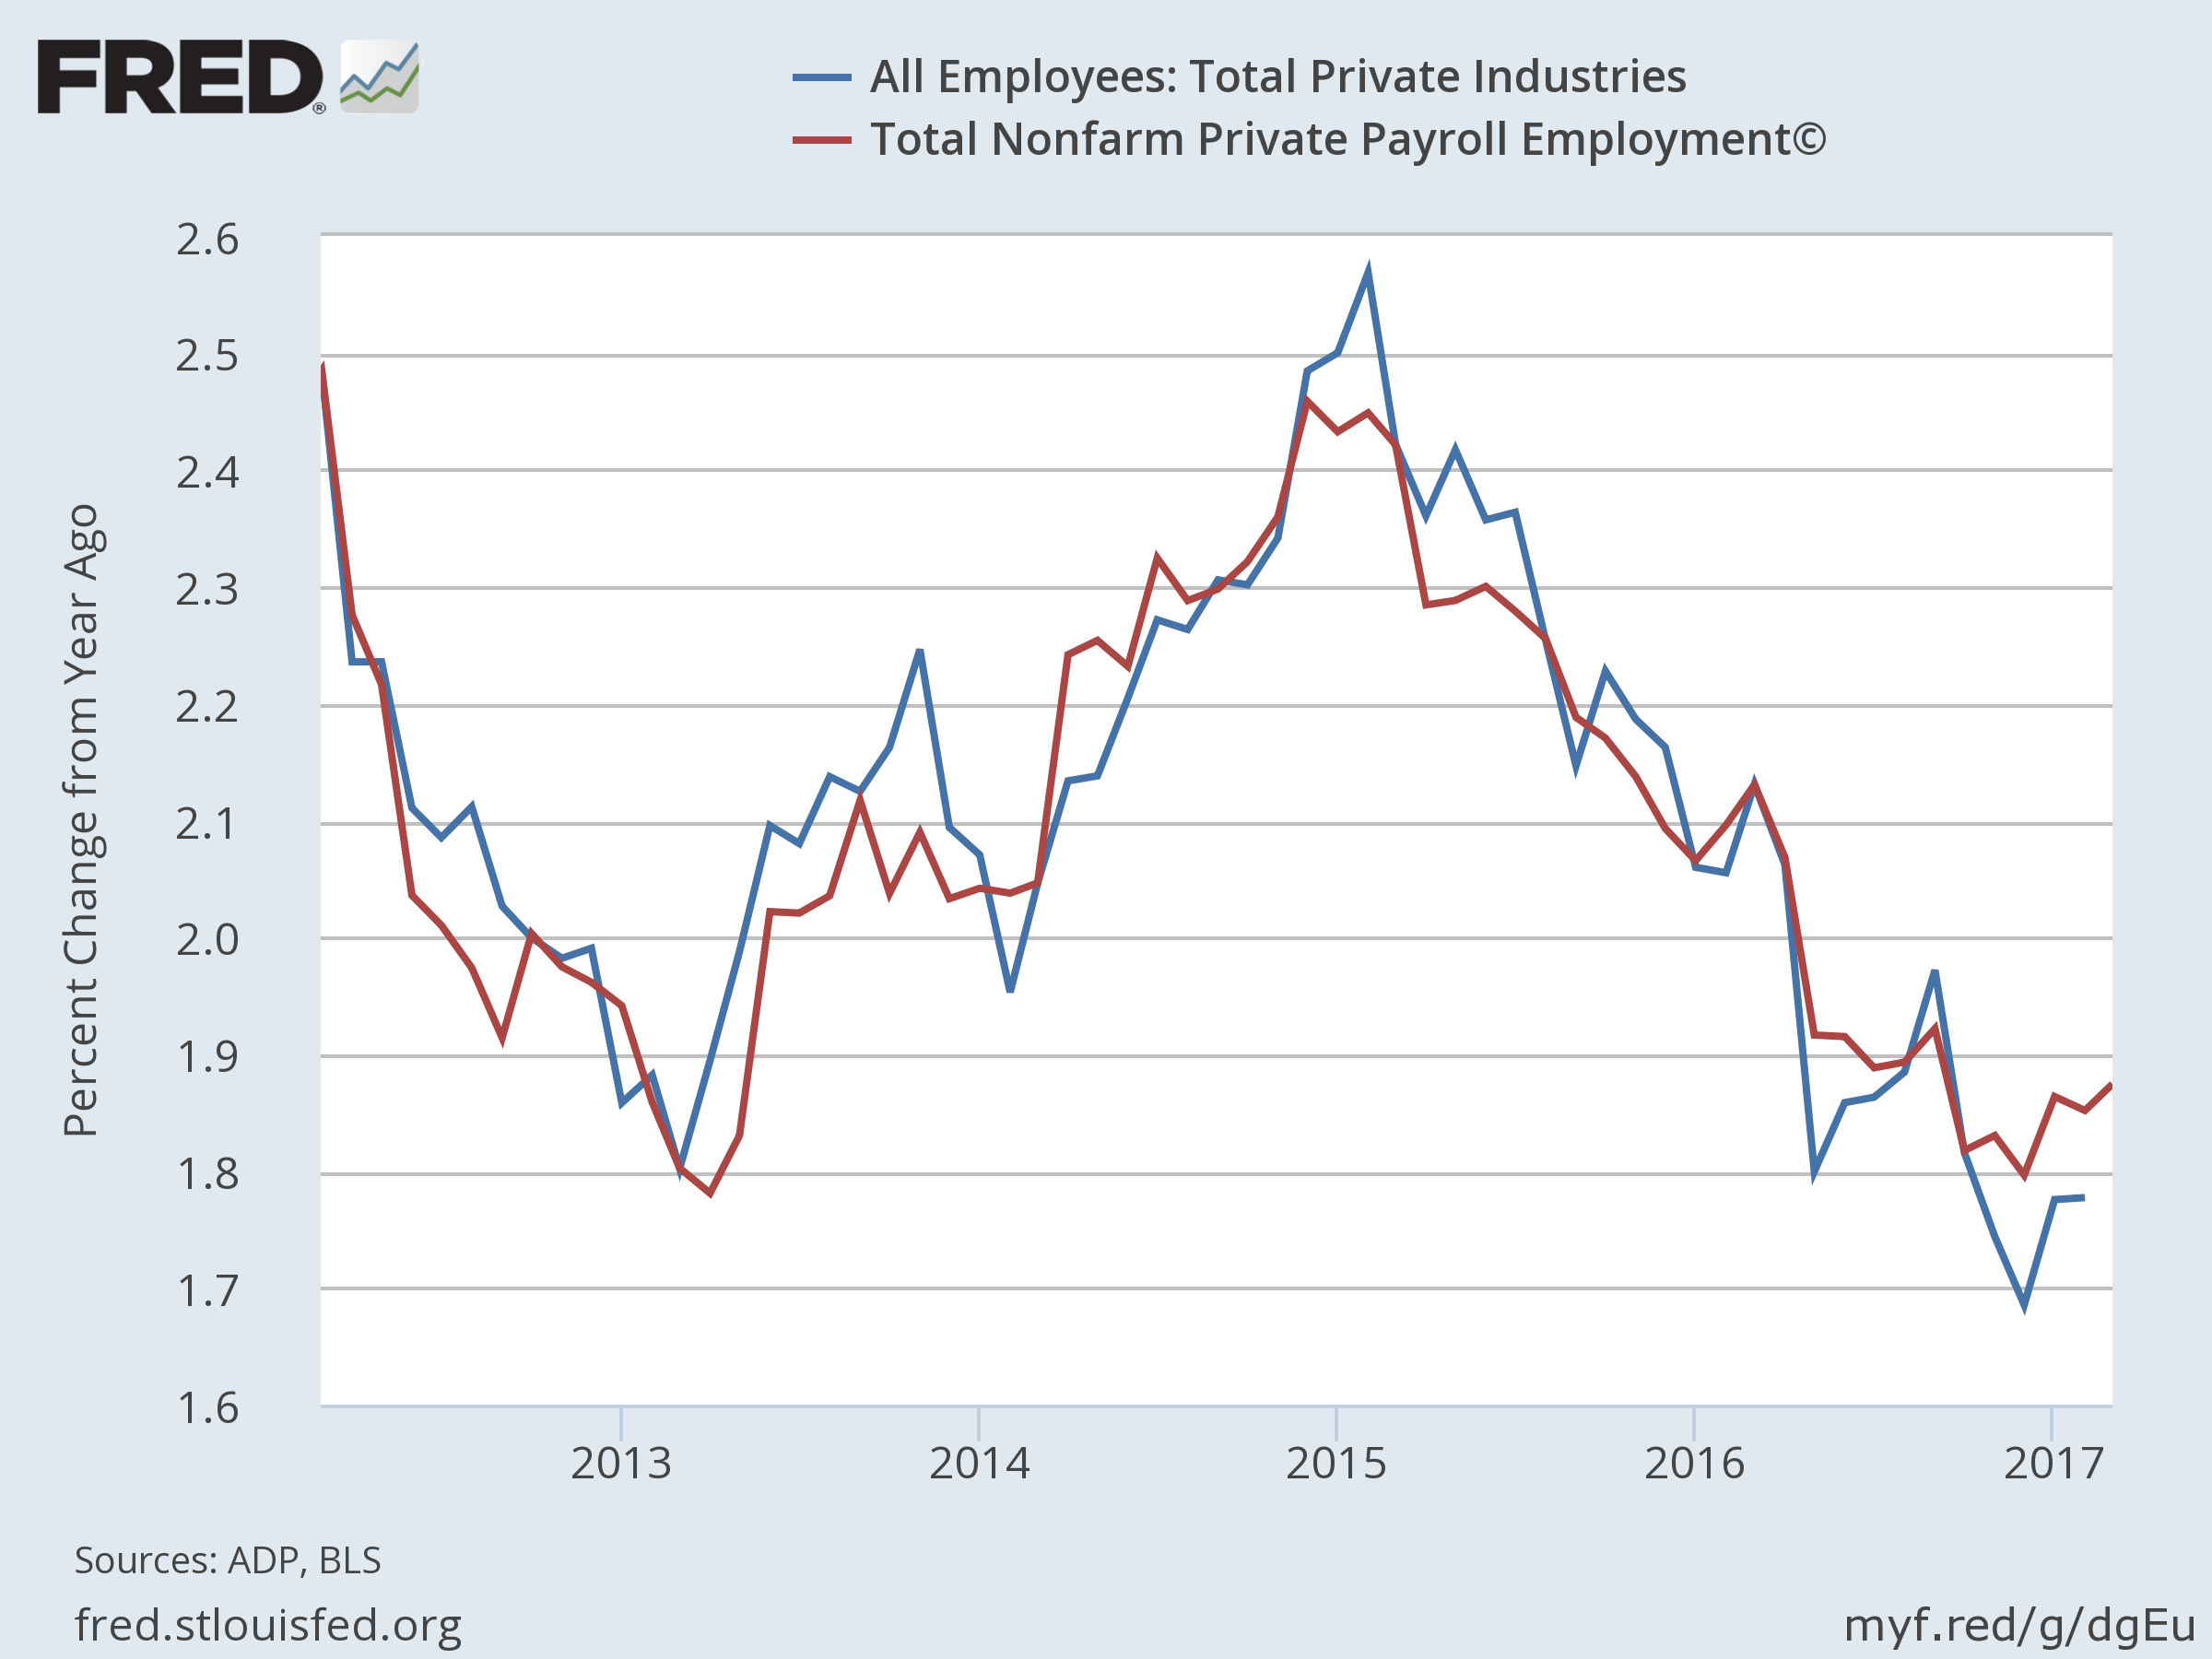 All Employees vs Non Farm Private Payroll Employees